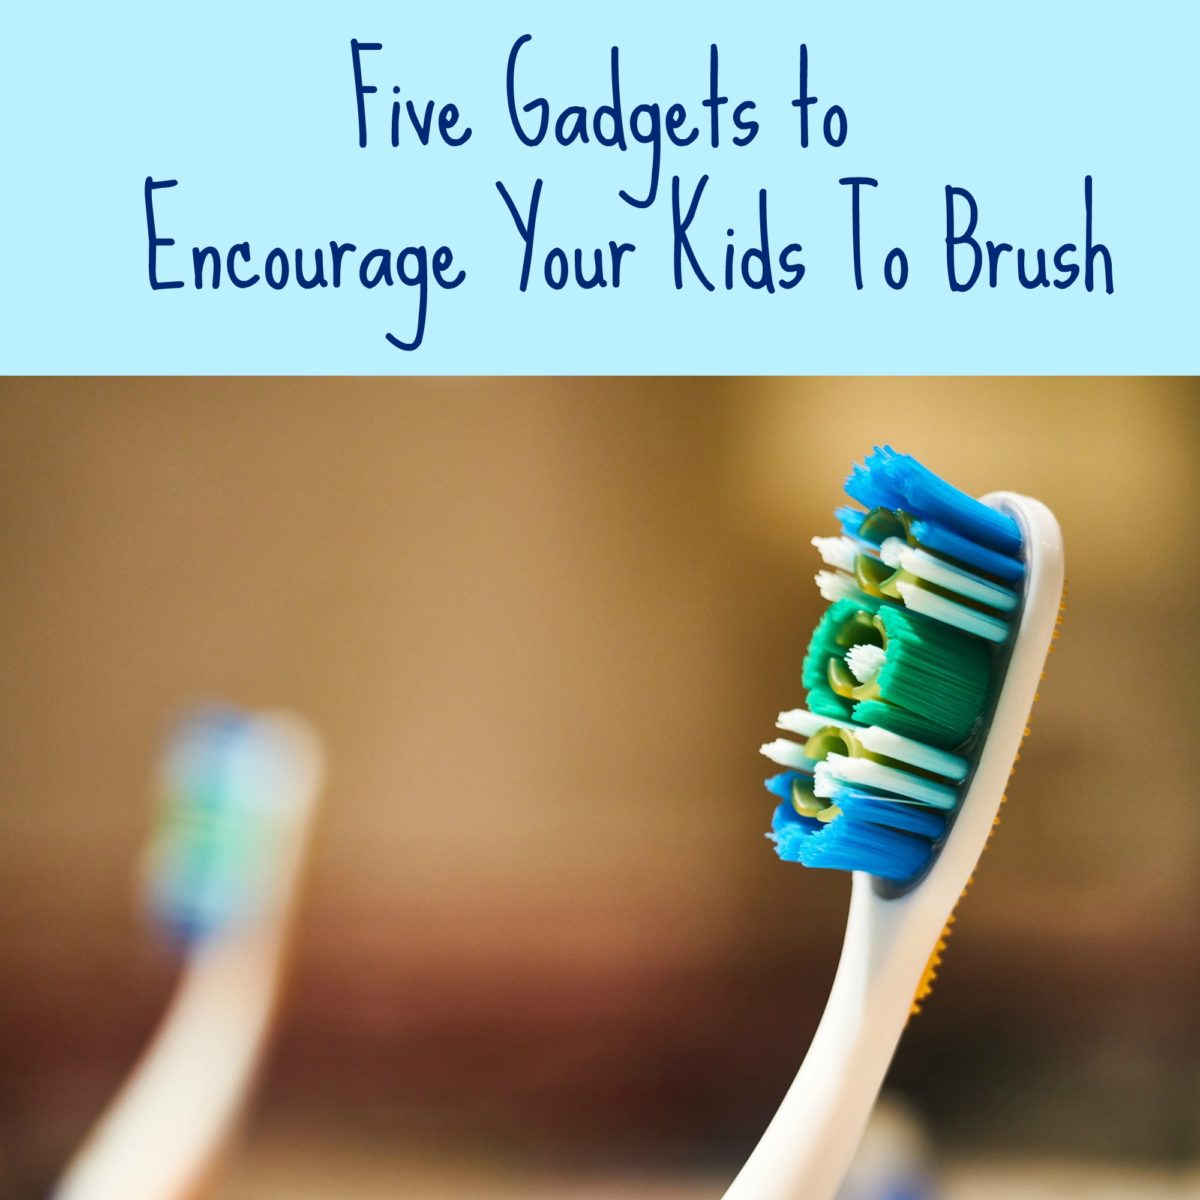 Five Gadgets To Encourage Your Kids To Brush